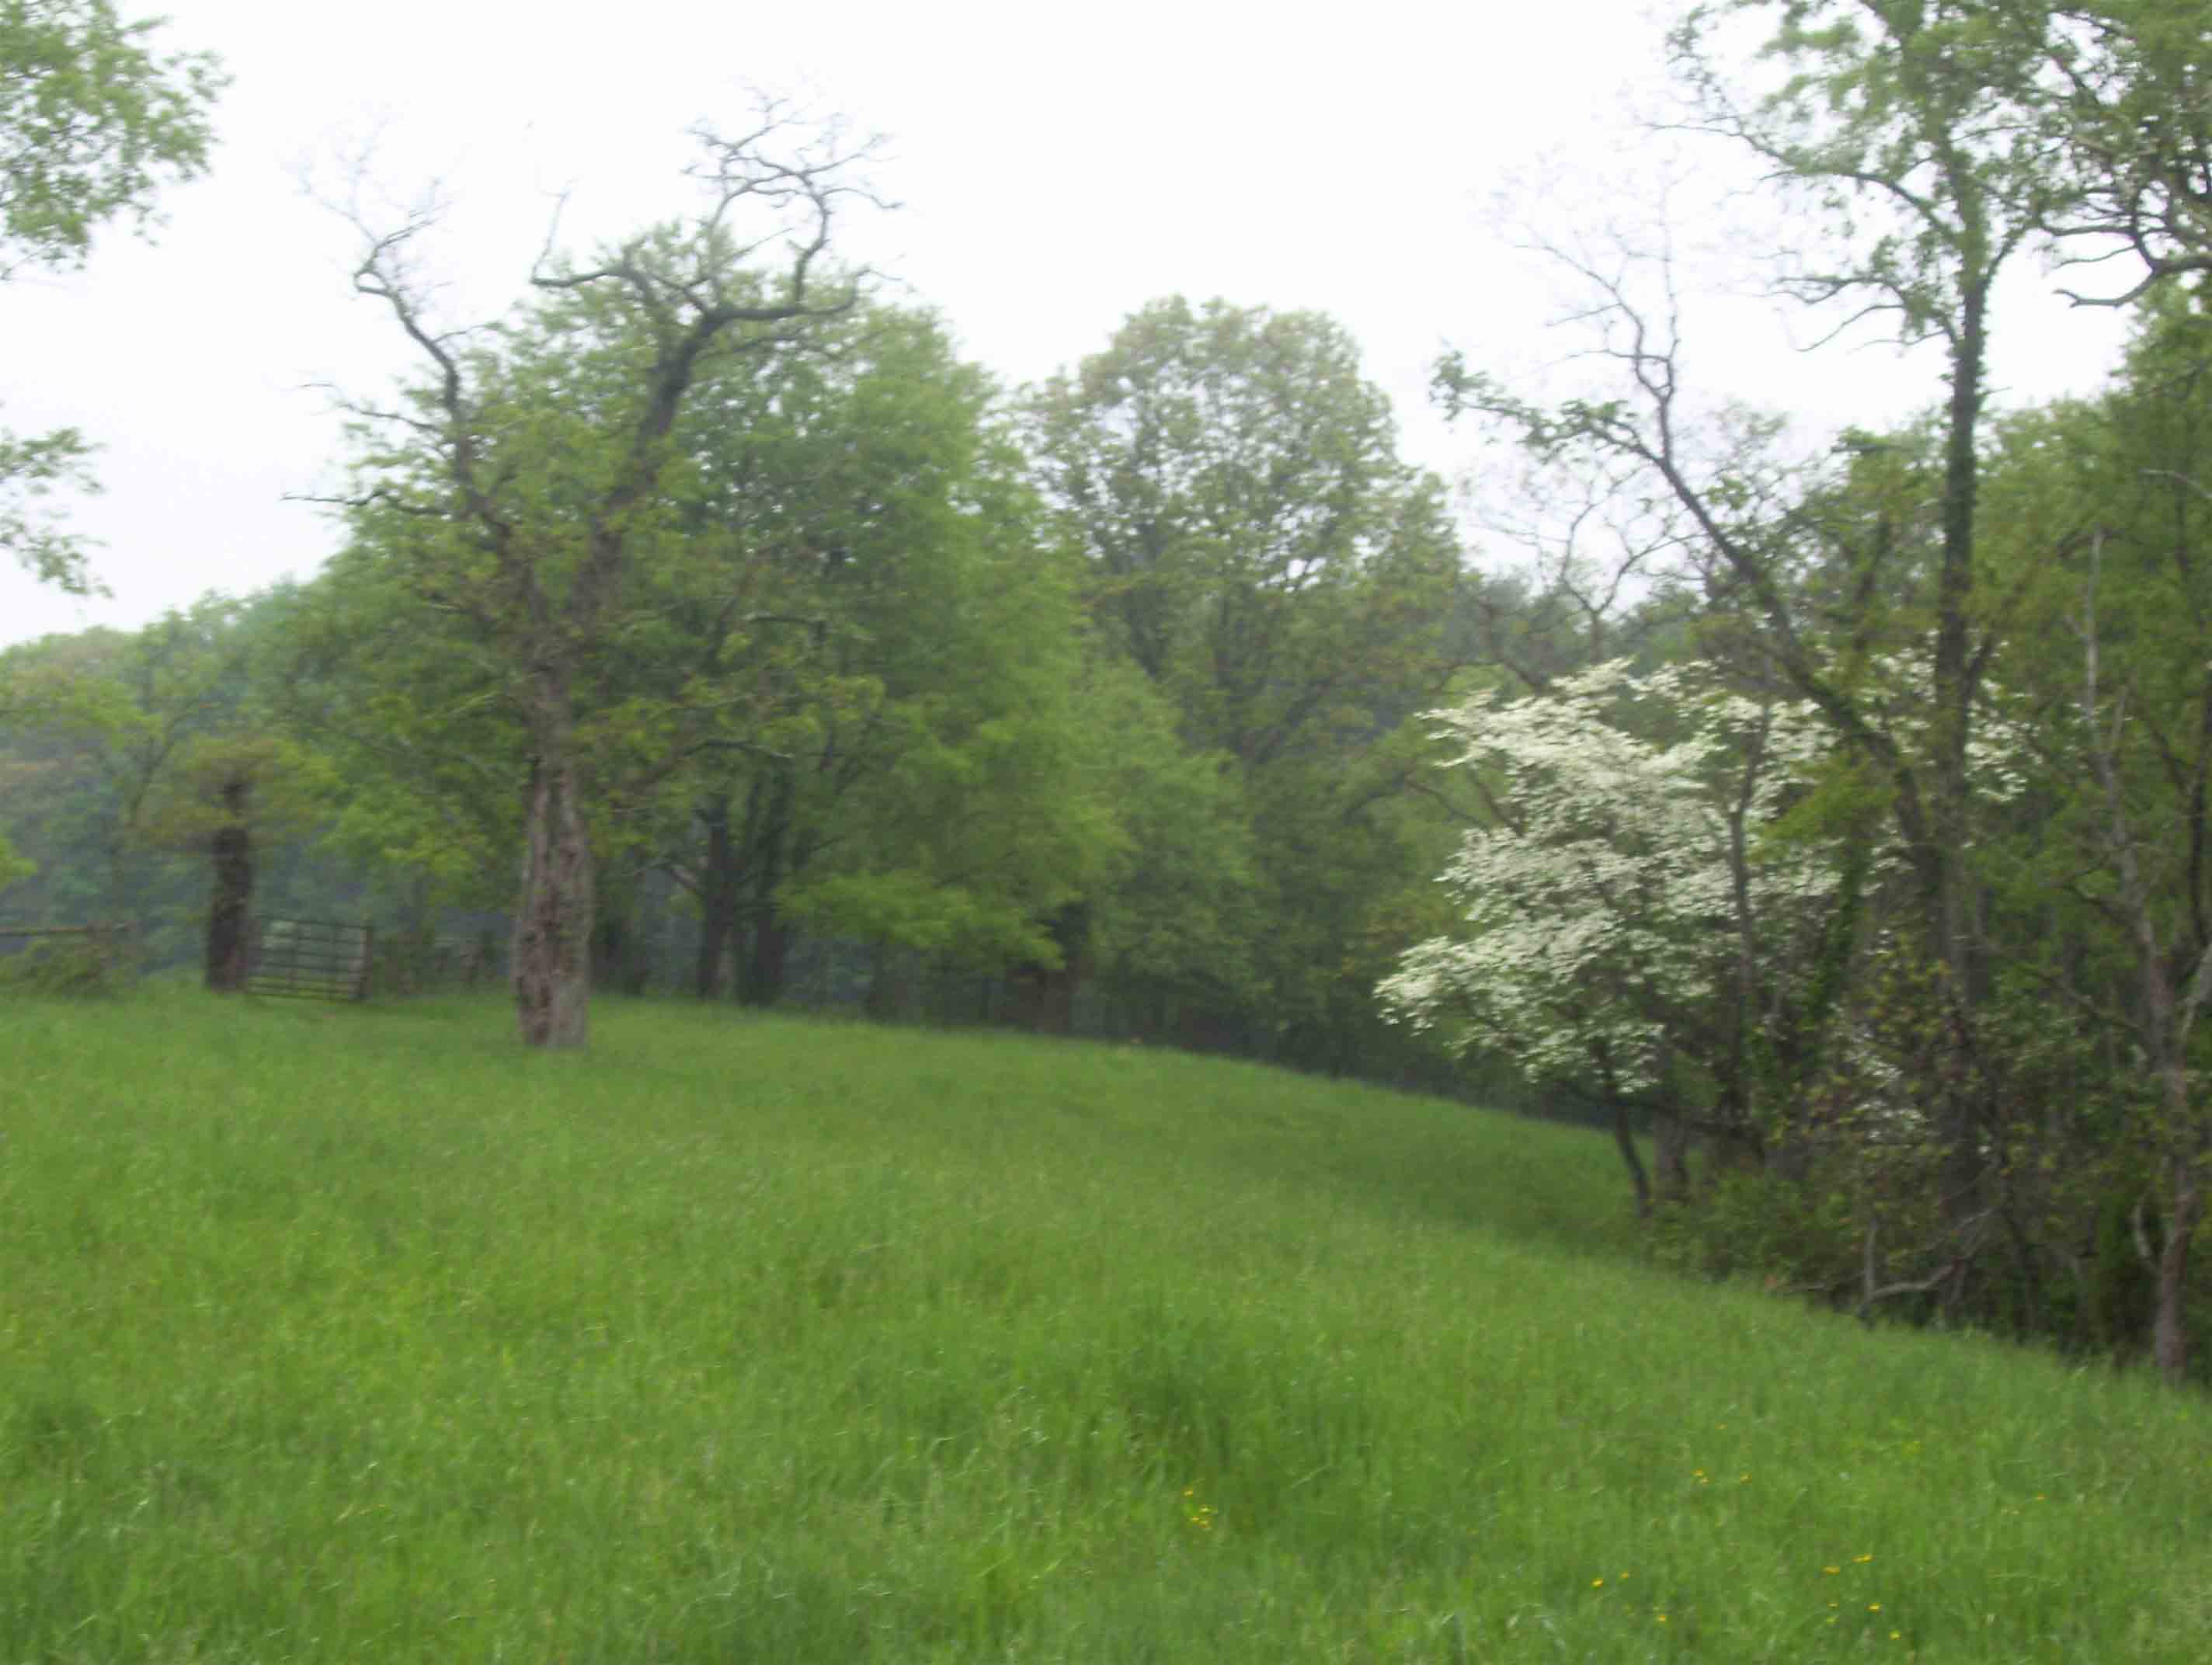 Dogwood in bloom in fields just south of VA 42. Taken at approx. MM 0.6.  Courtesy dlcul@conncoll.edu